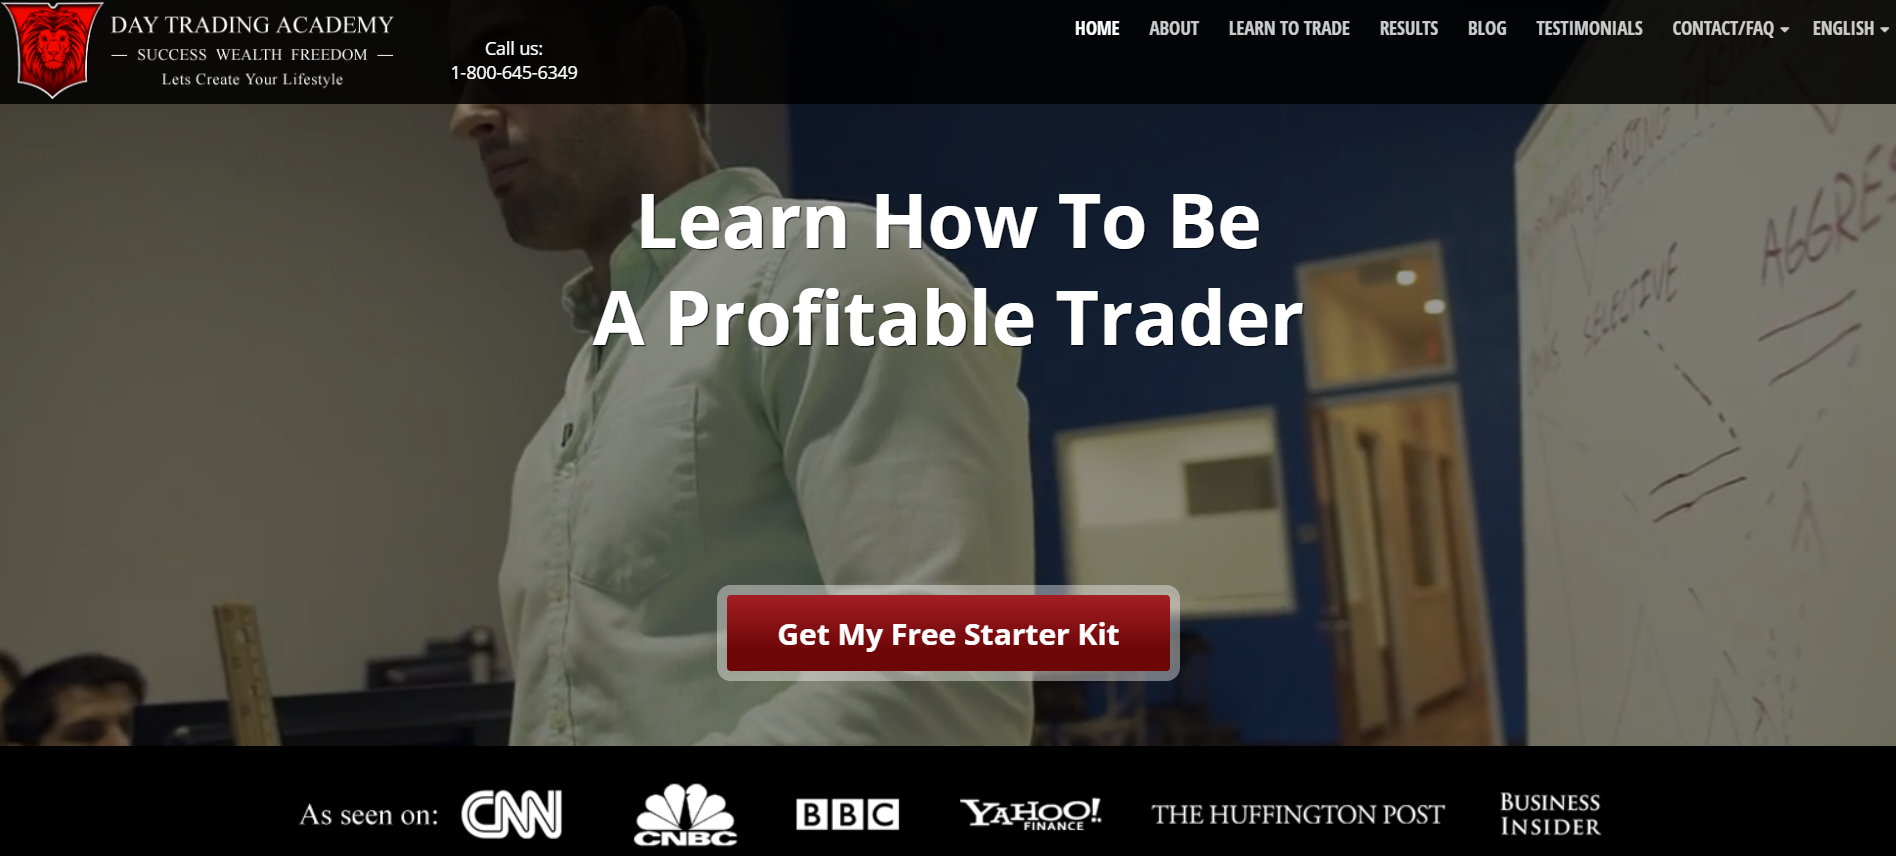 day trading academy scam